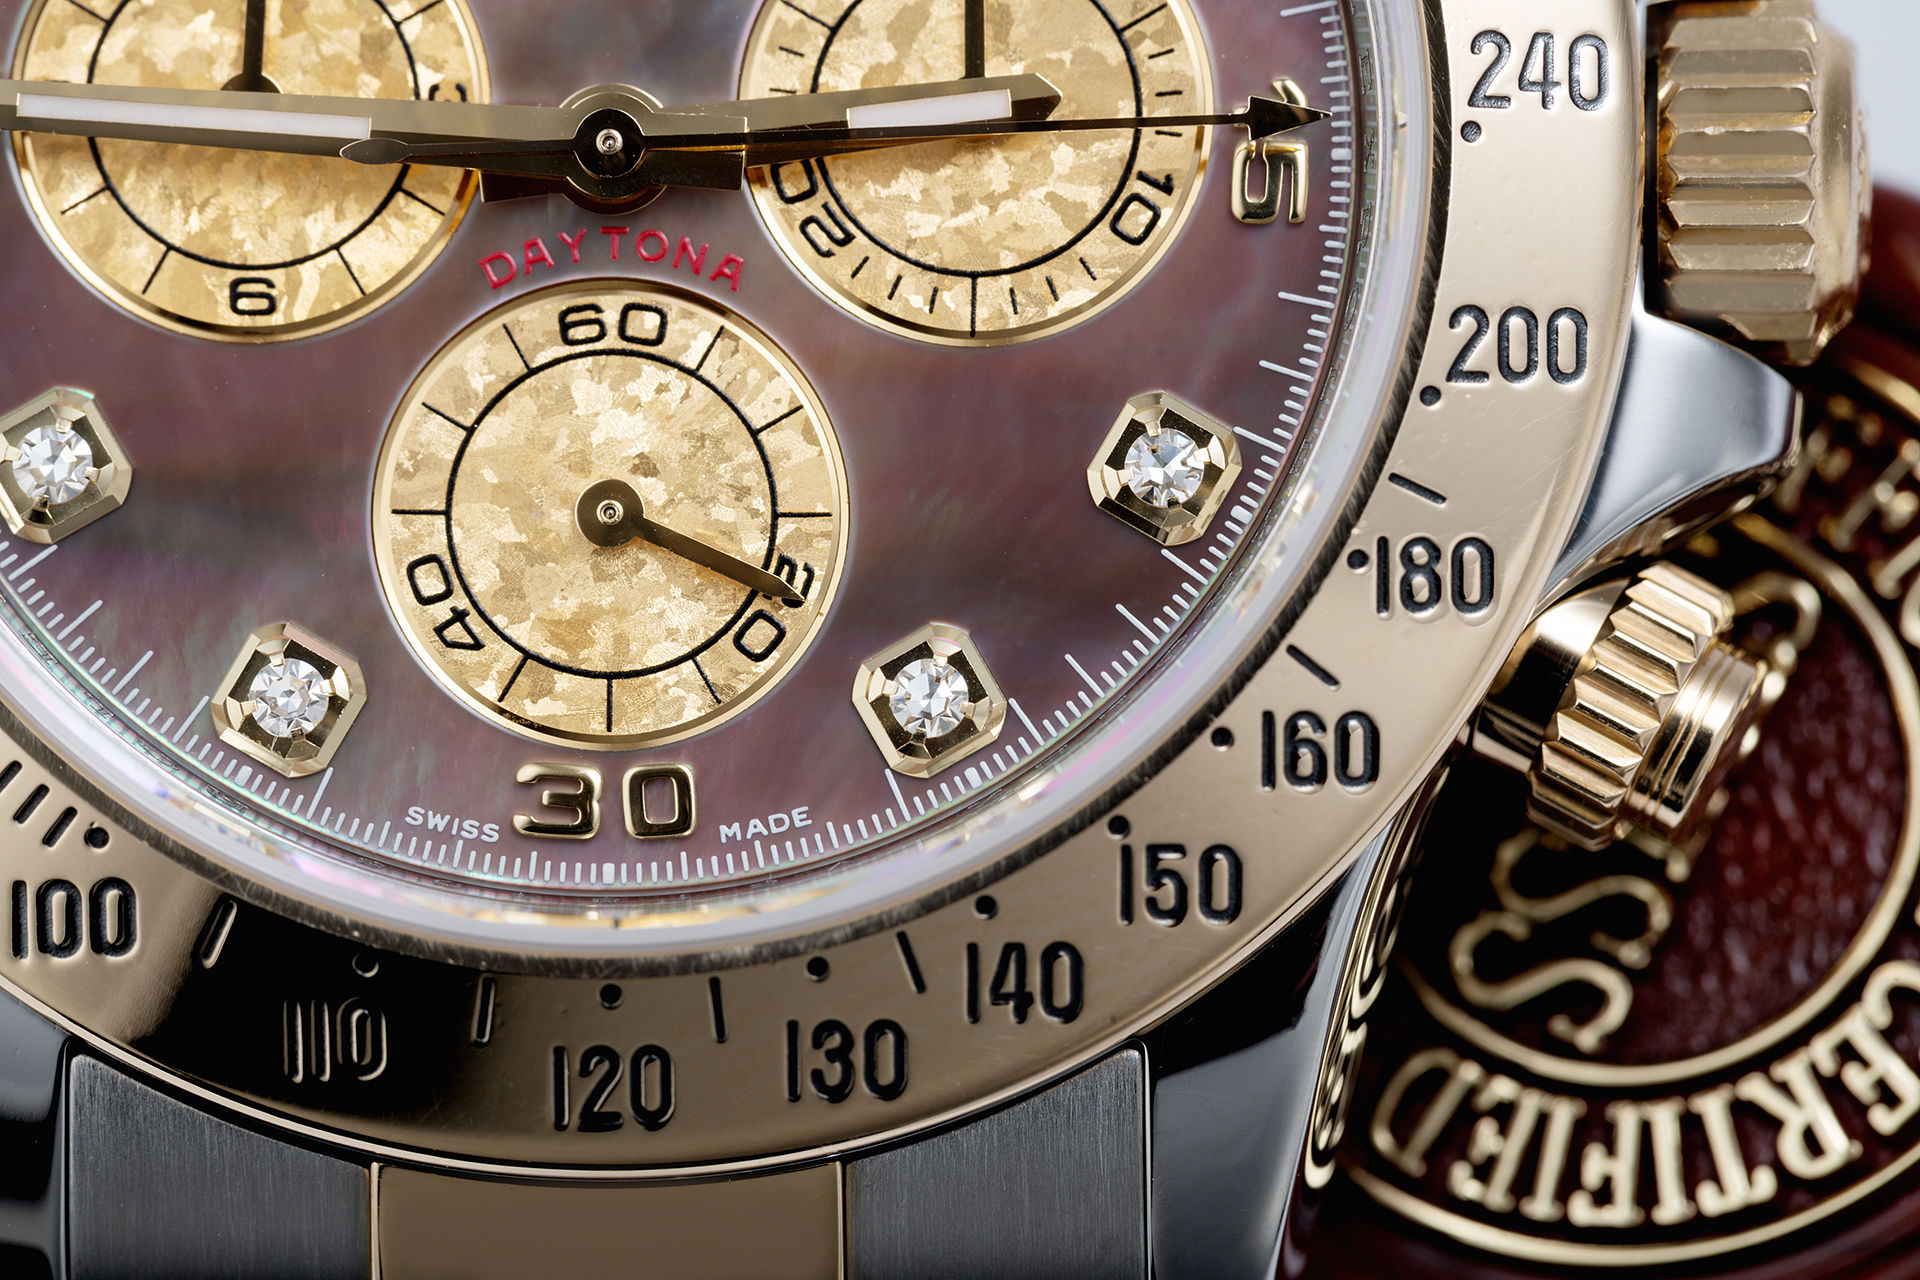 ref 116523 | 'Mother of Pearl & Crystal Dial' | Rolex Cosmograph Daytona